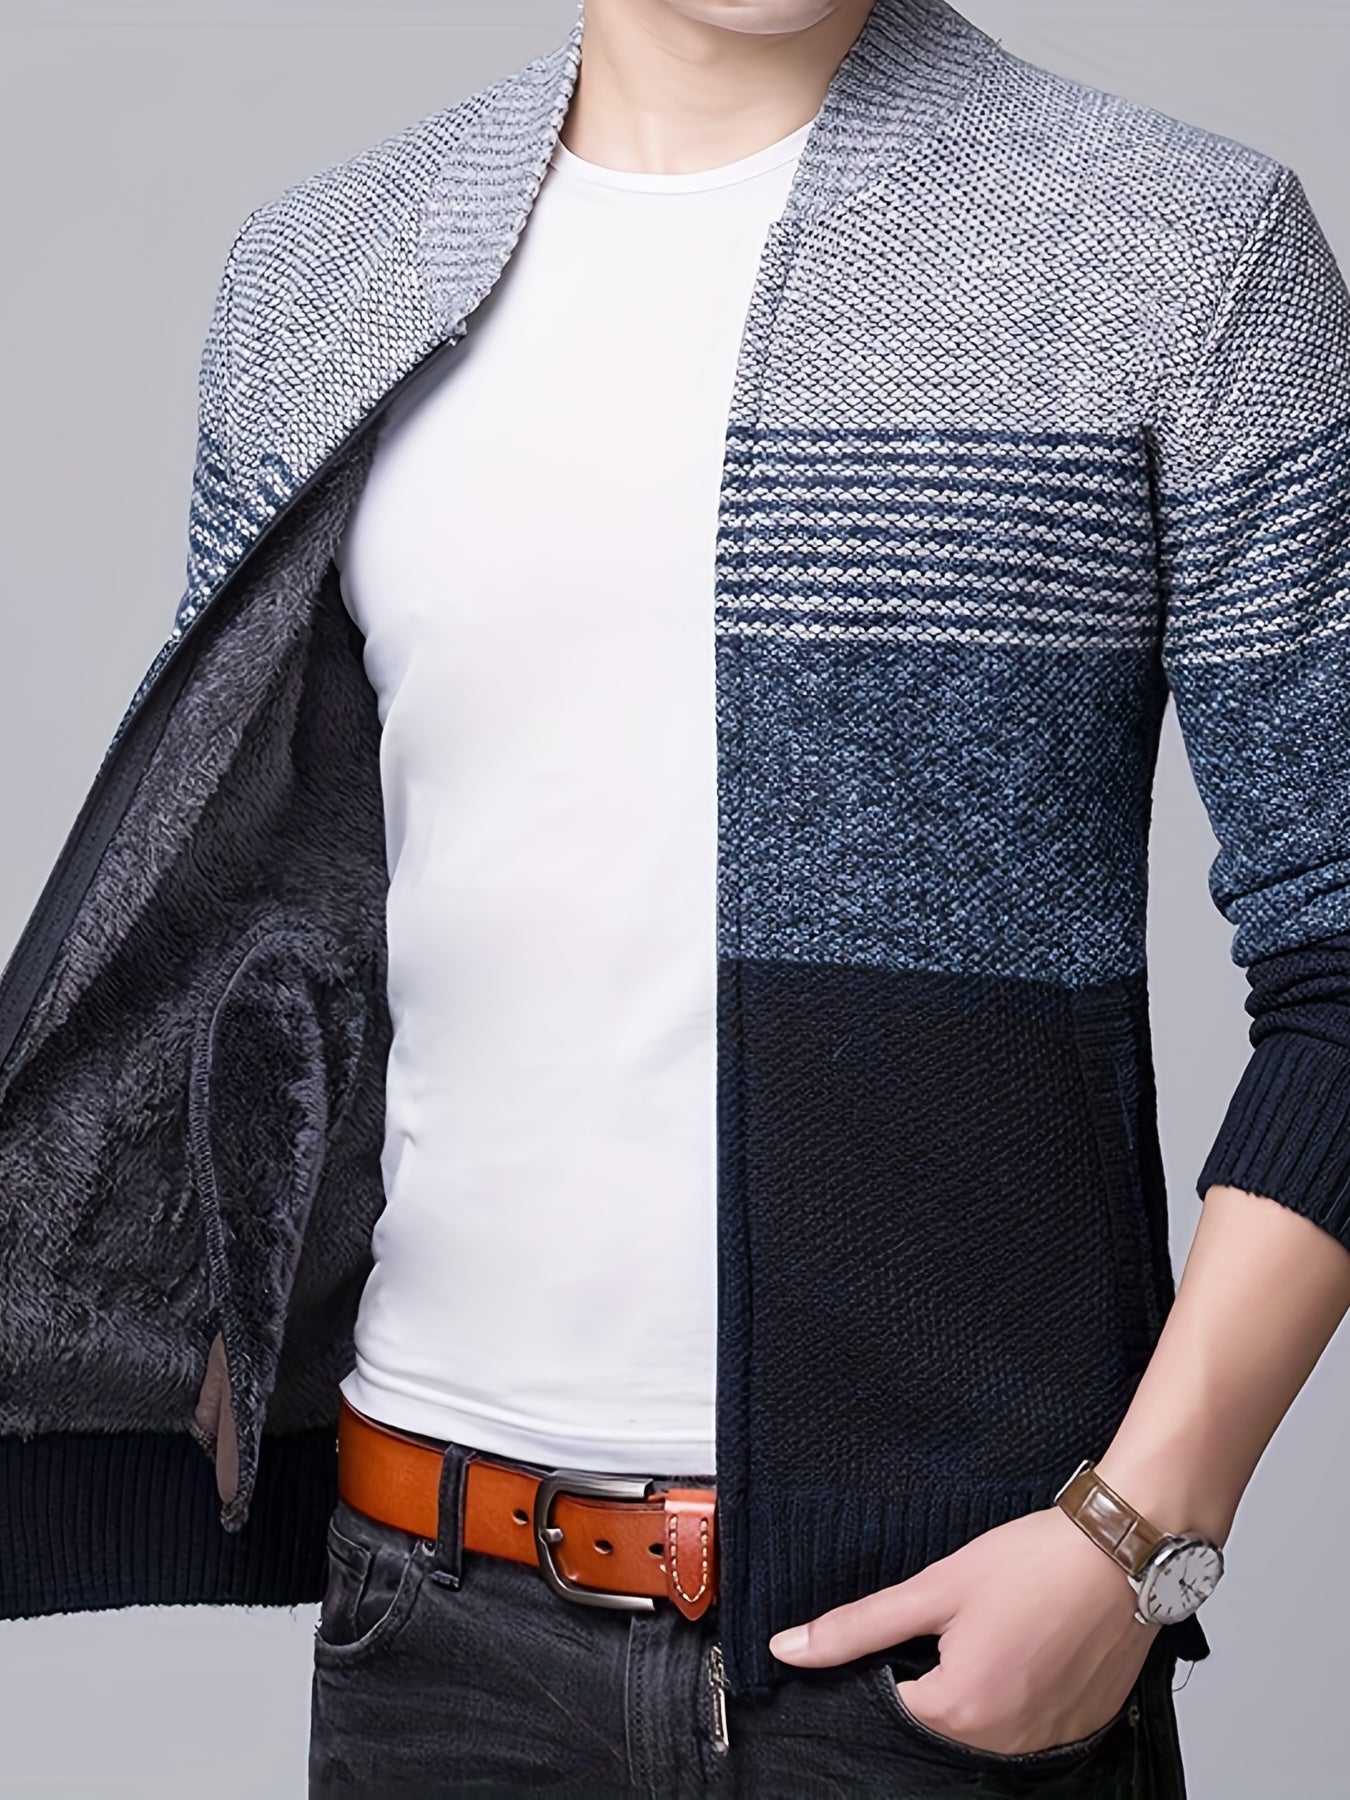 Color Block Warm Zip Up Jacket Sweater, Men's Casual Stand Collar Mid Stretch Cardigan For Fall Winter